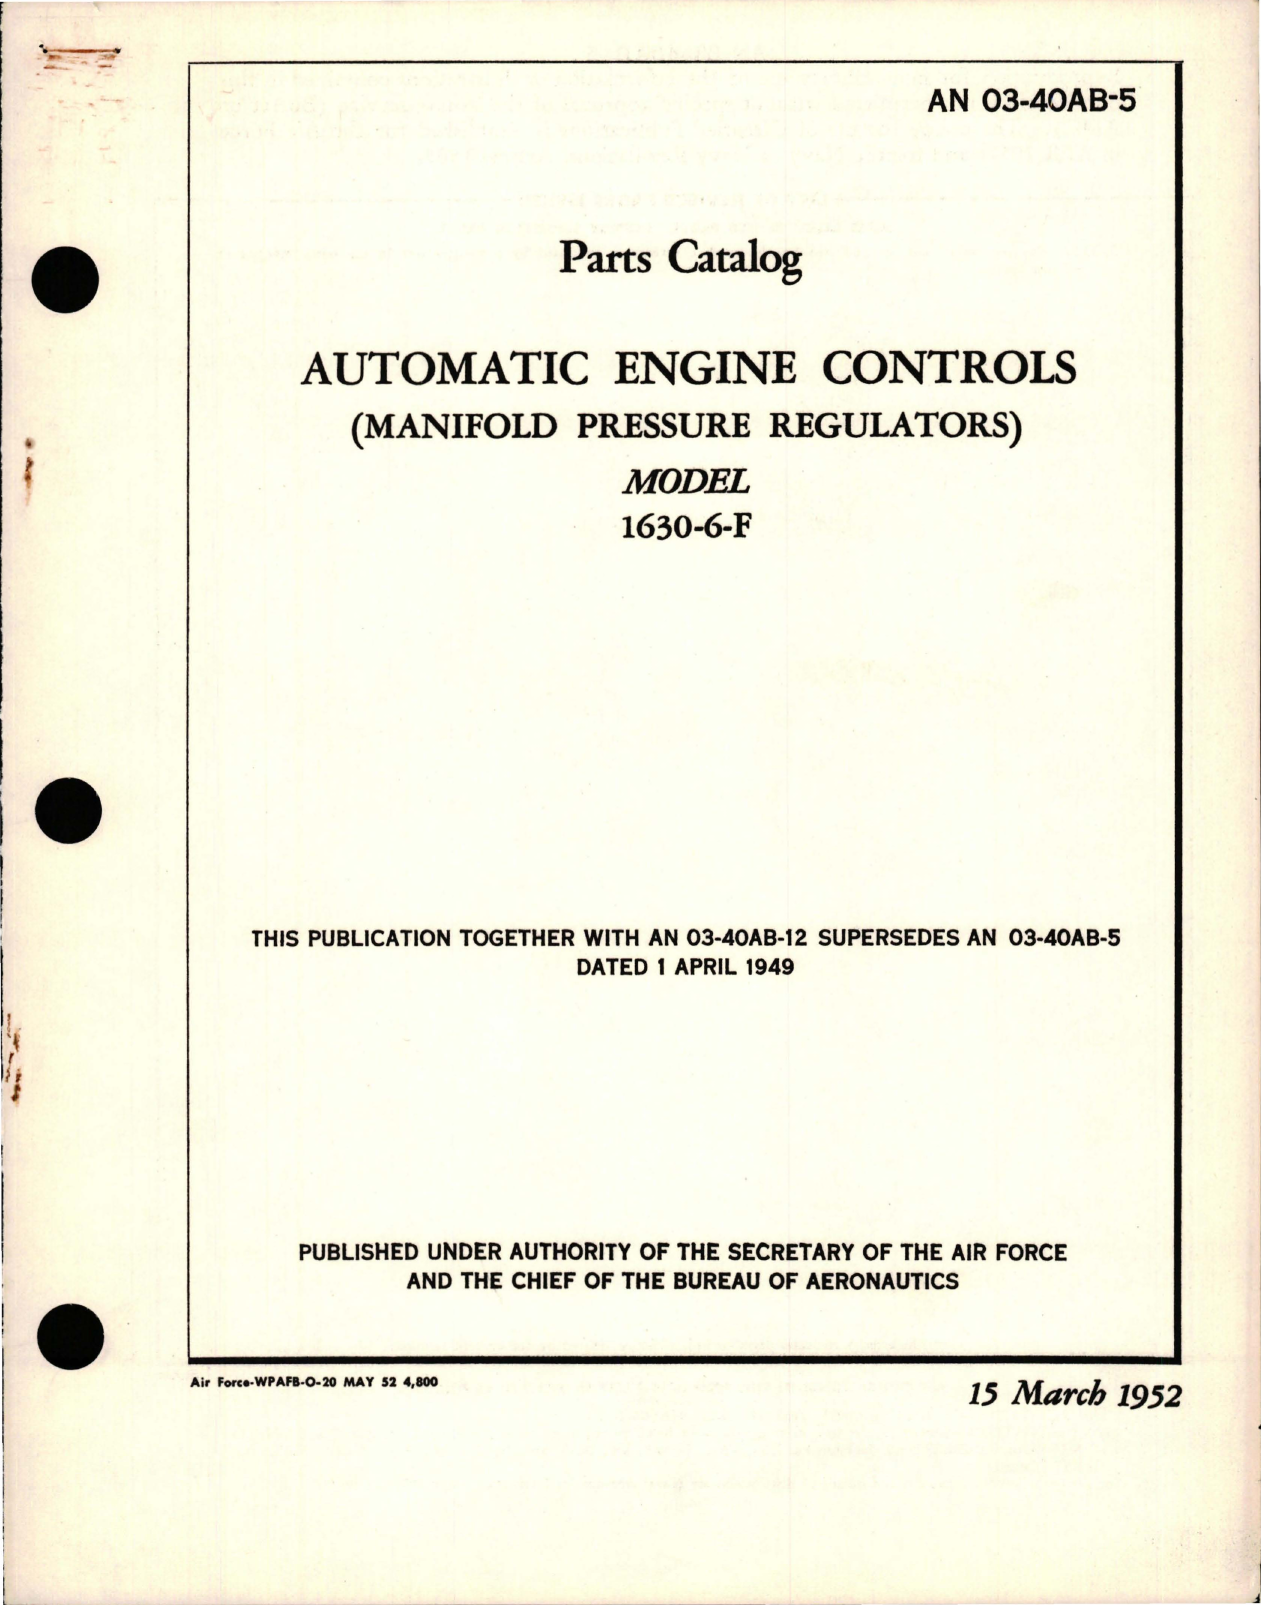 Sample page 1 from AirCorps Library document: Parts Catalog for Automatic Engine Controls (Manifold Pressure Regulators) - Model 1630-6-F